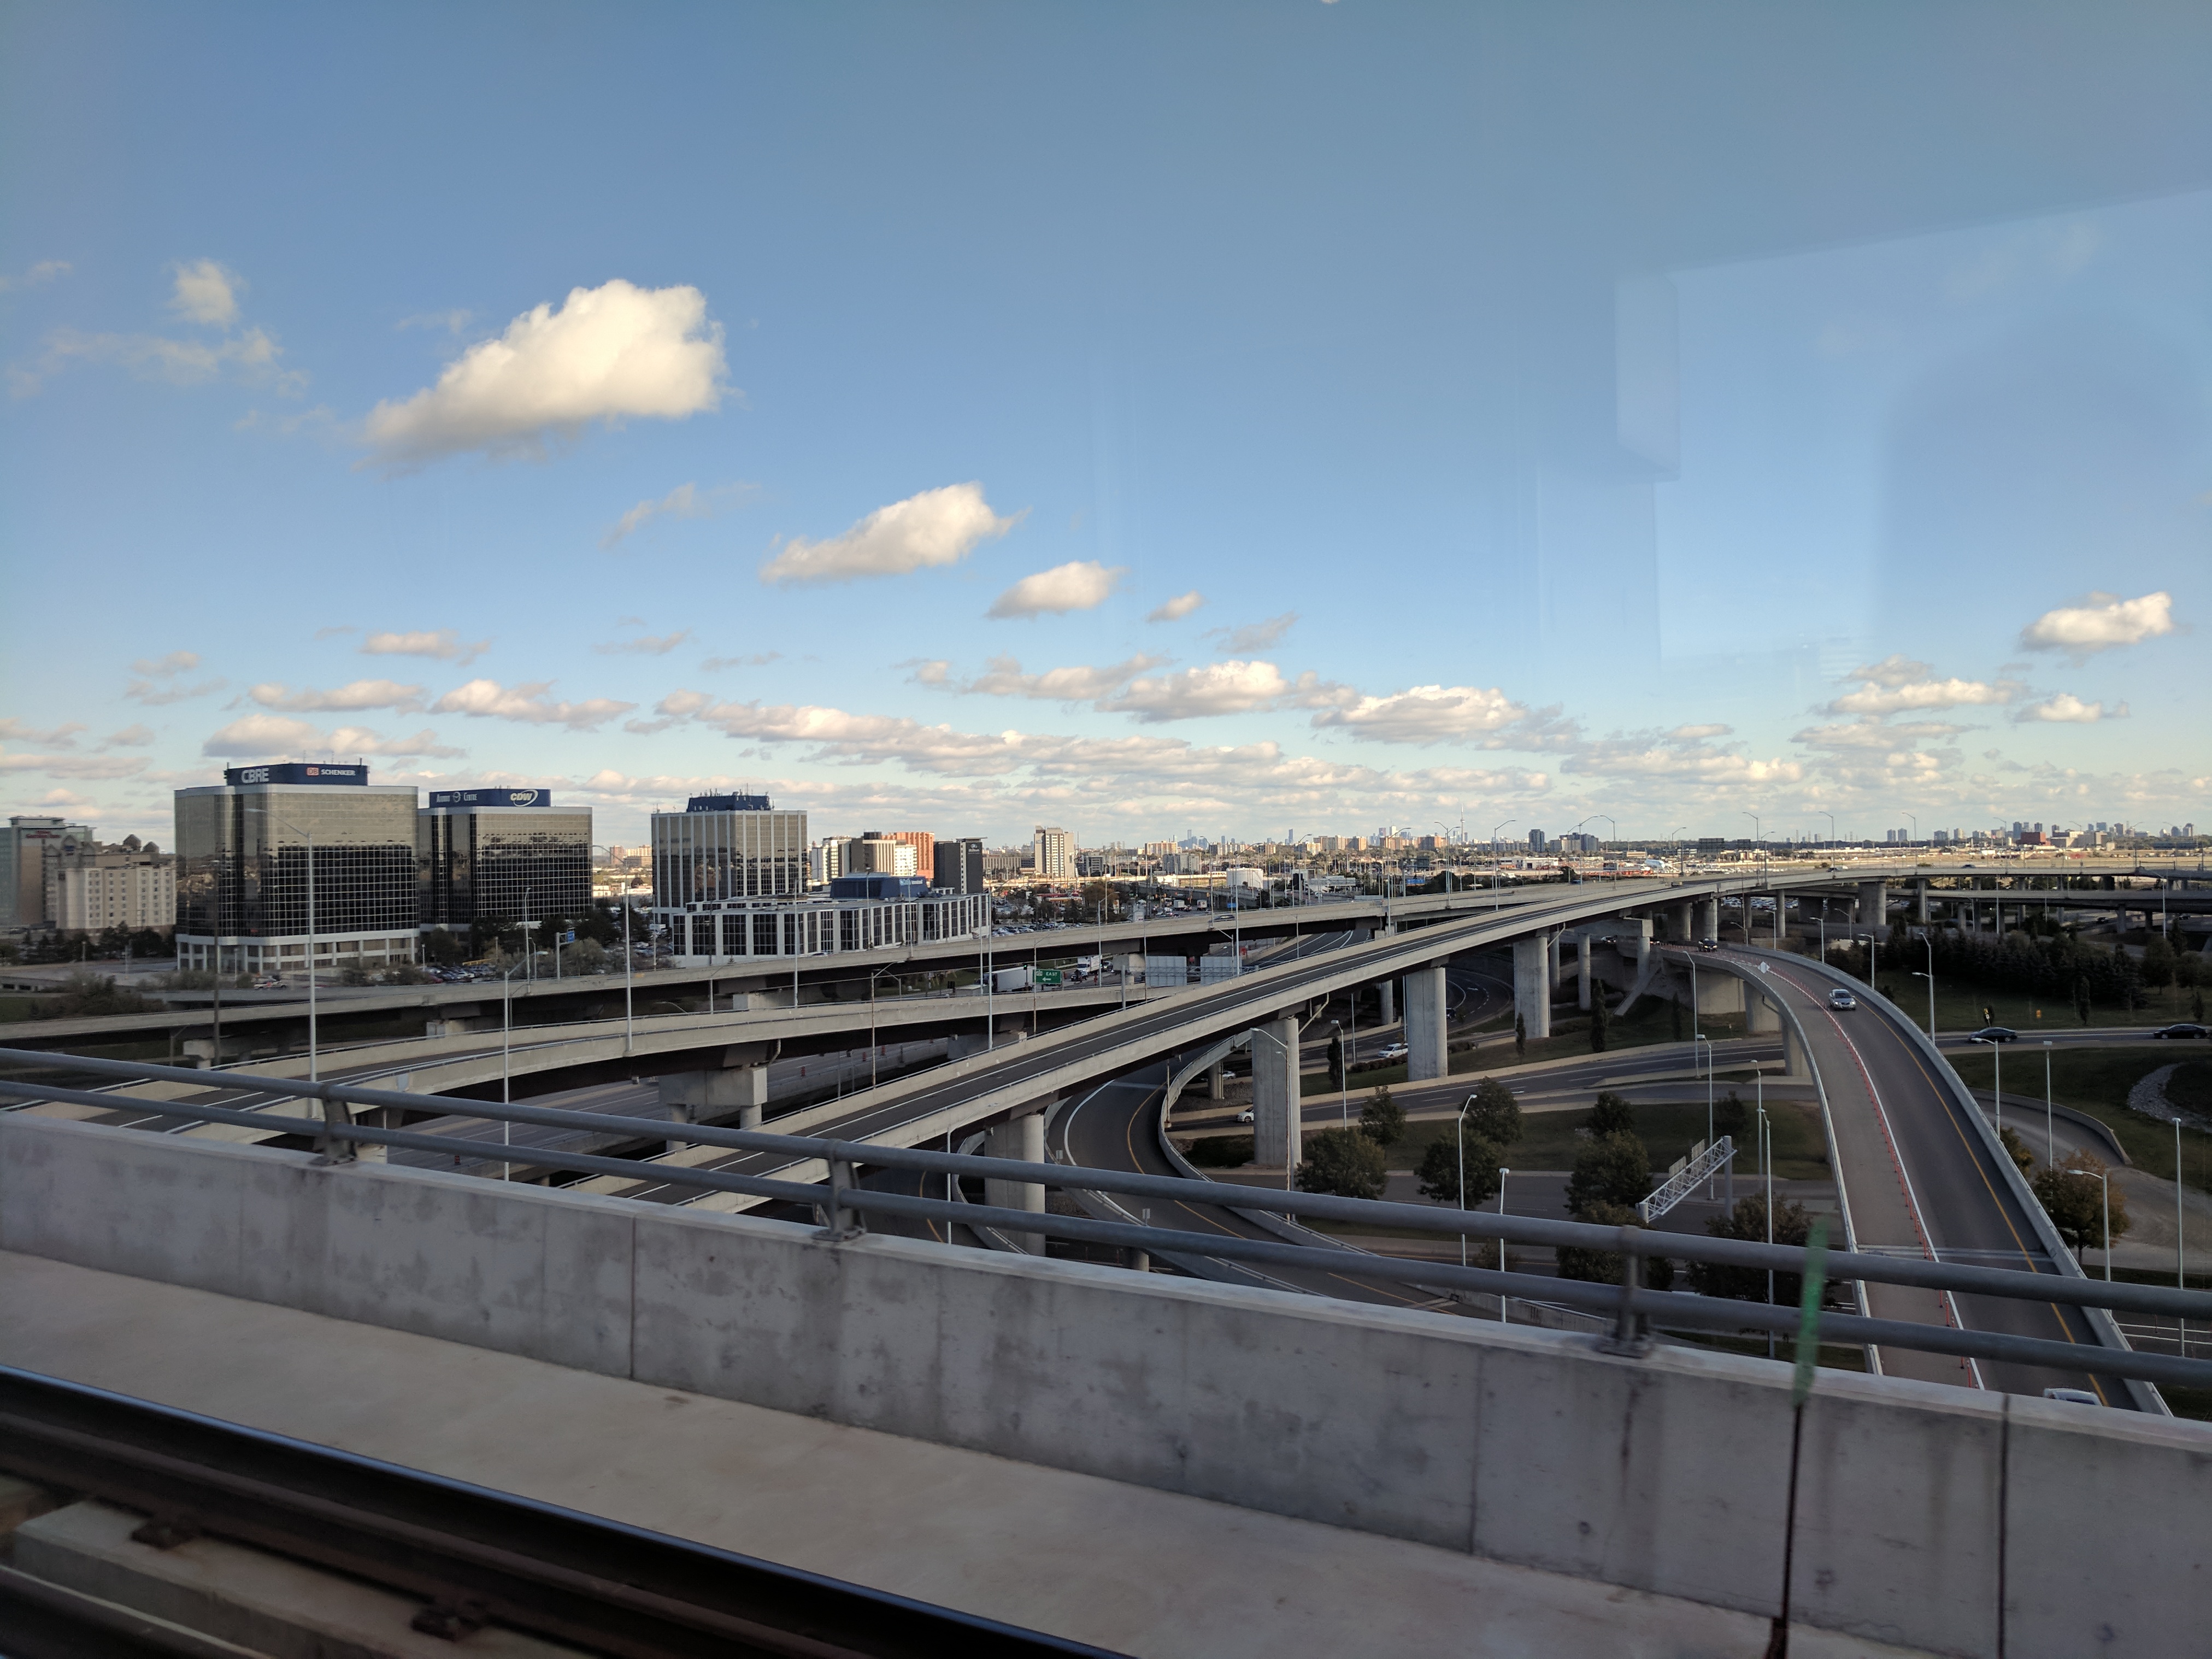 A spaghetti junction of flyovers, Toronto off in the distance.